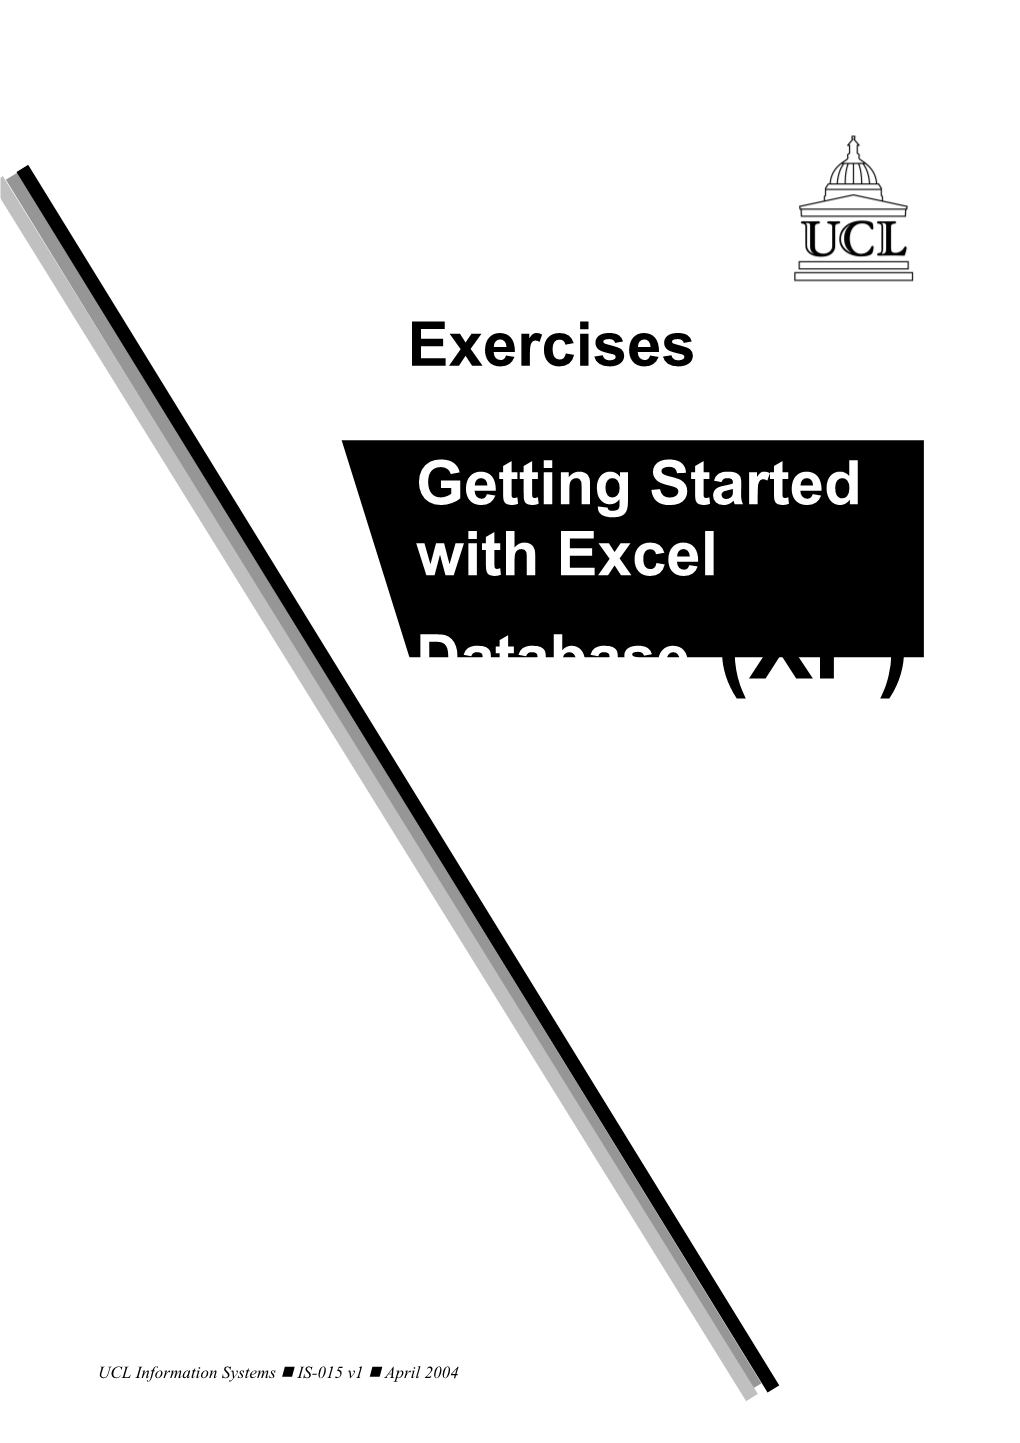 Getting Started with Excel - Exercises